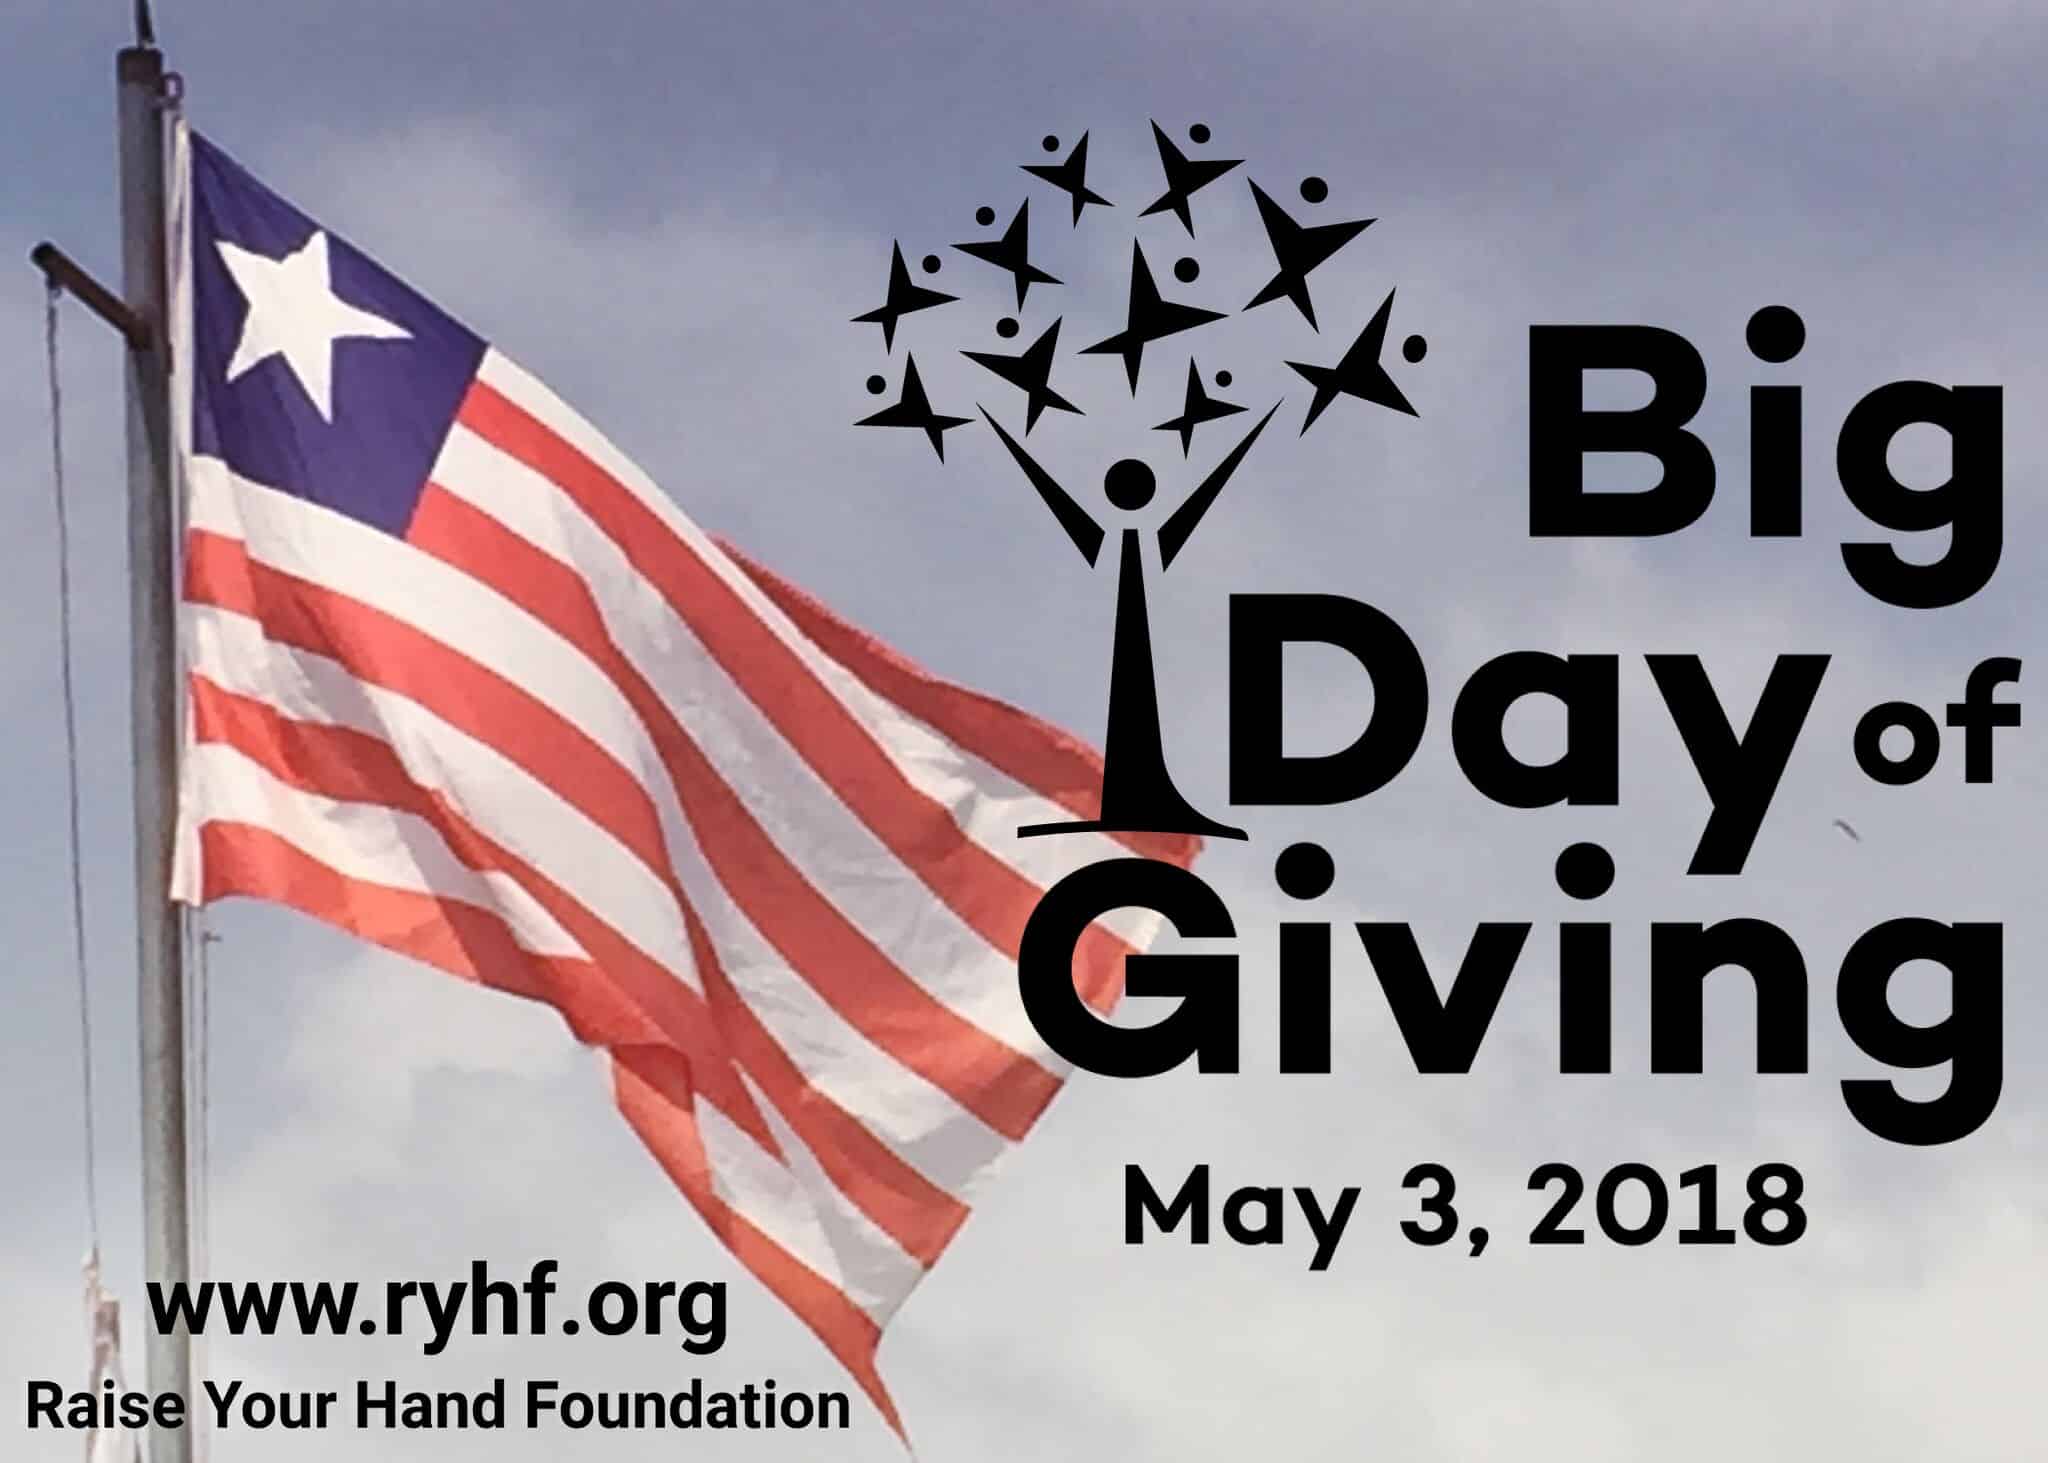 Big Day of Giving is Here!  May 3, 2018